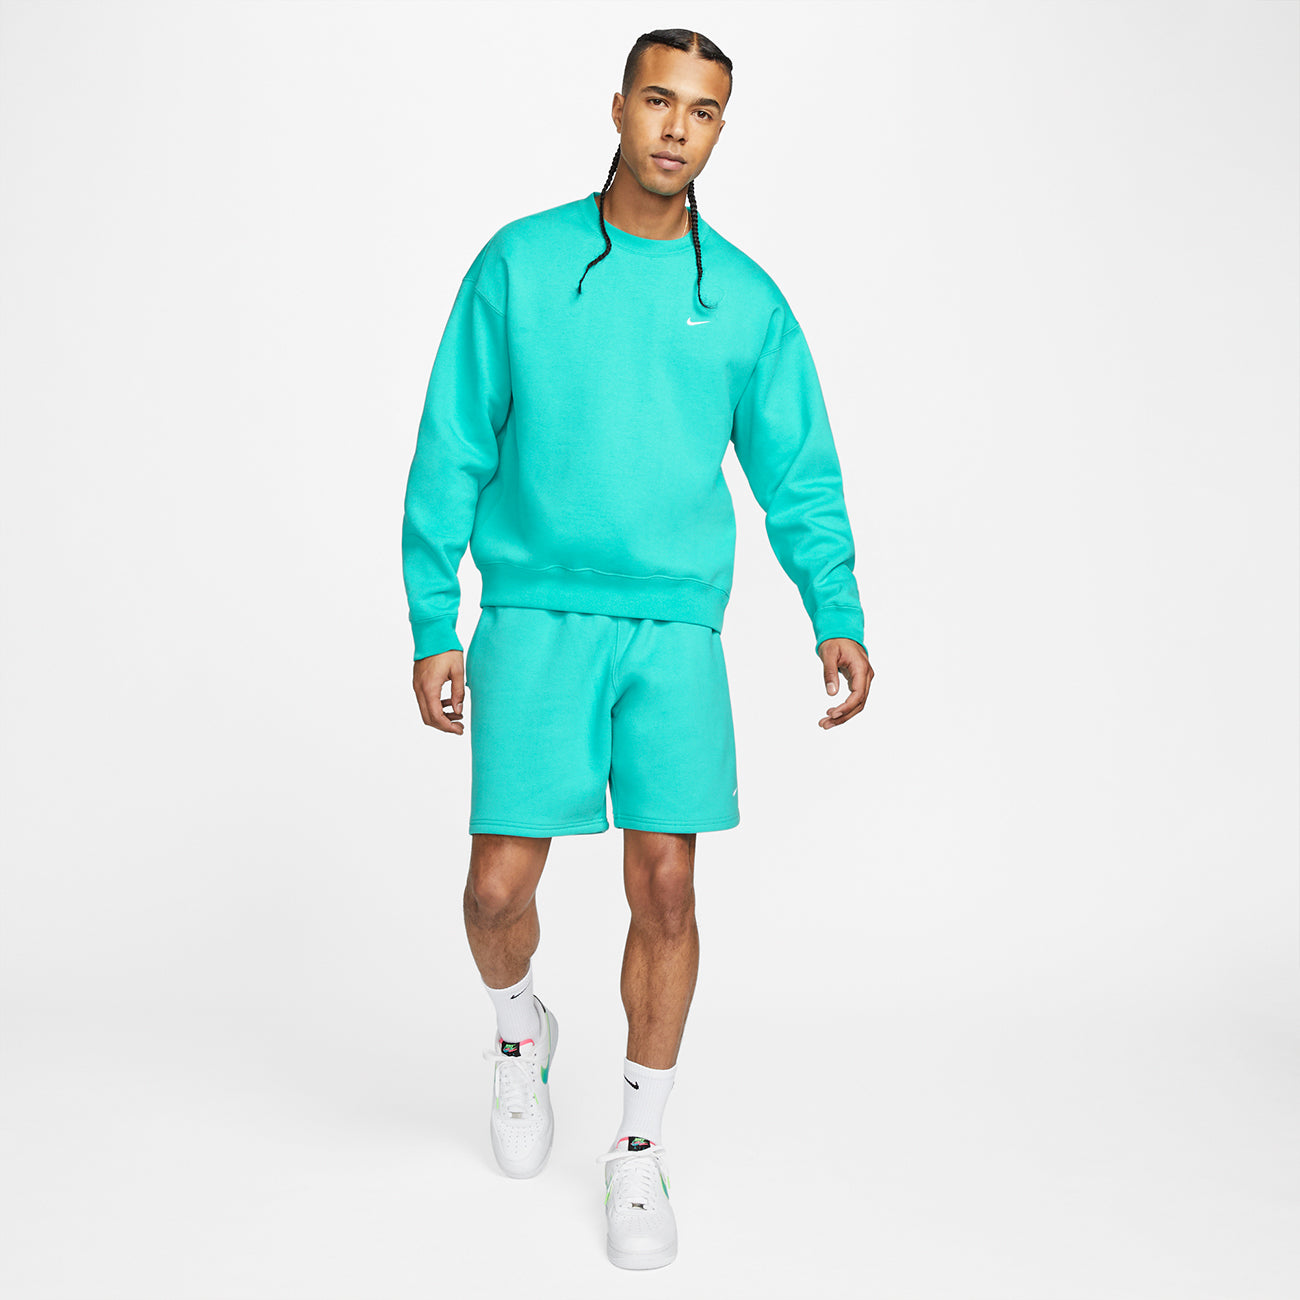 Soloswoosh Fleece Short Washed - Teal/White